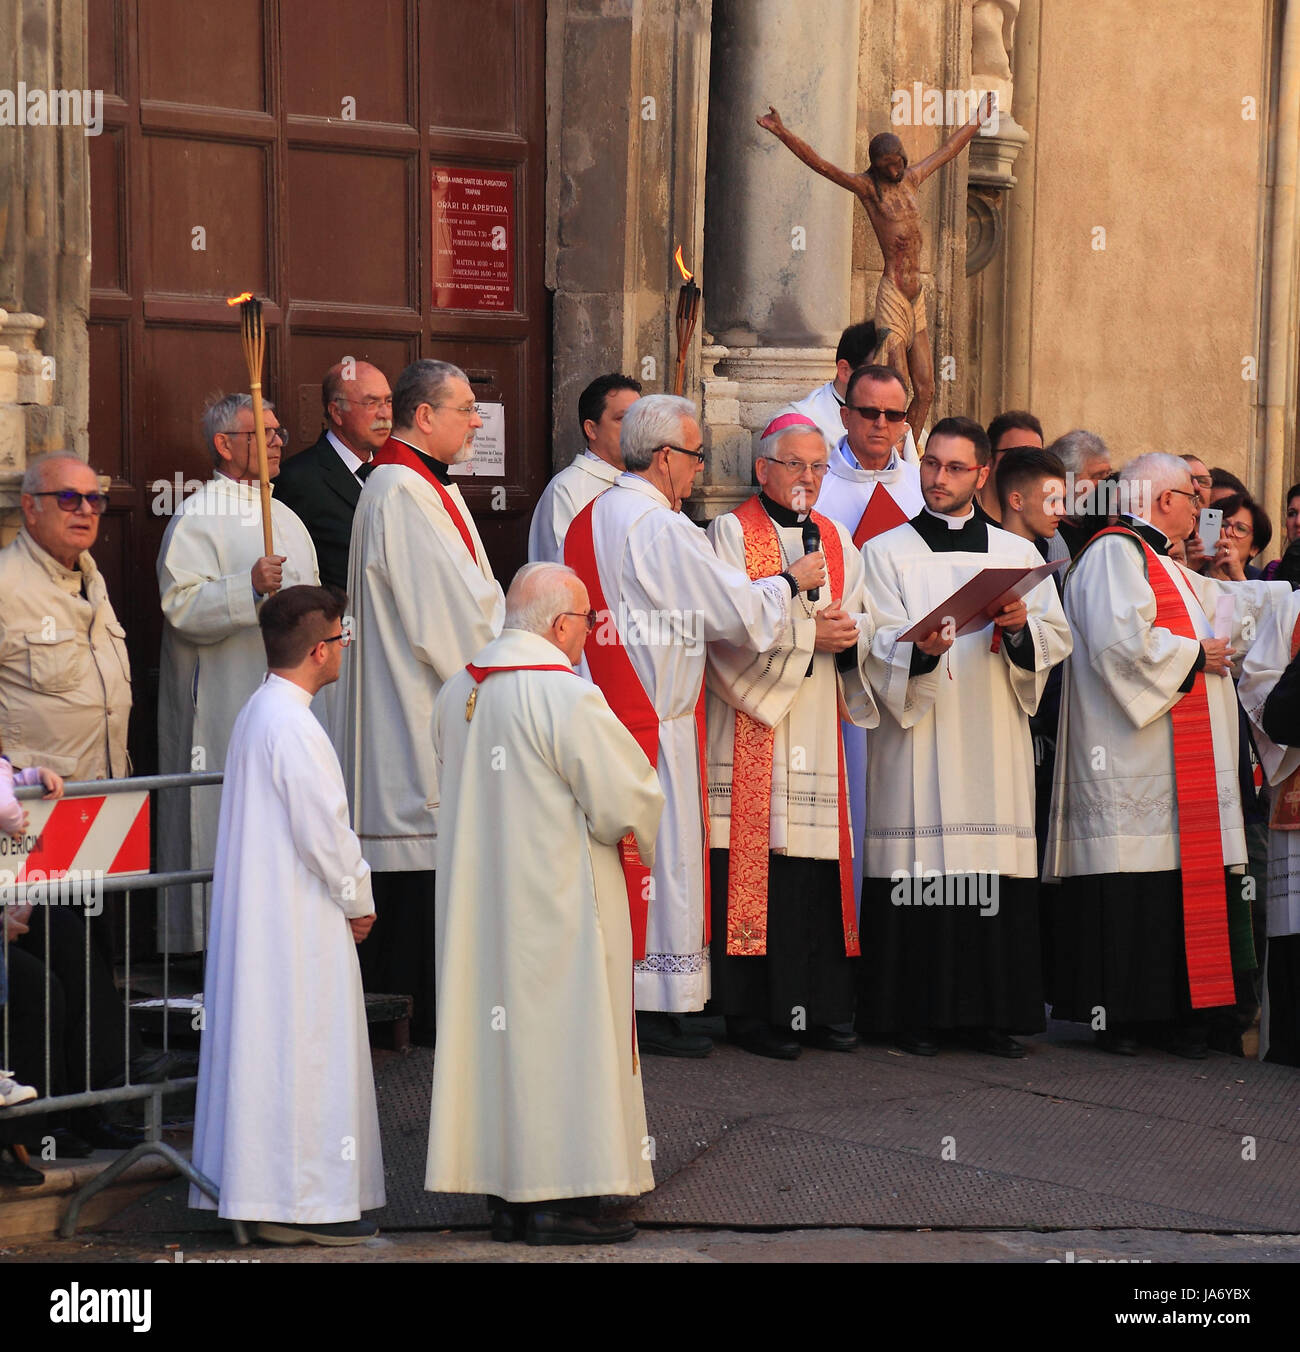 Sicily, in the old town of Trapani, groups and people during the Good Friday Mystery Procession La Processione dei Misteri, Easter procession Stock Photo